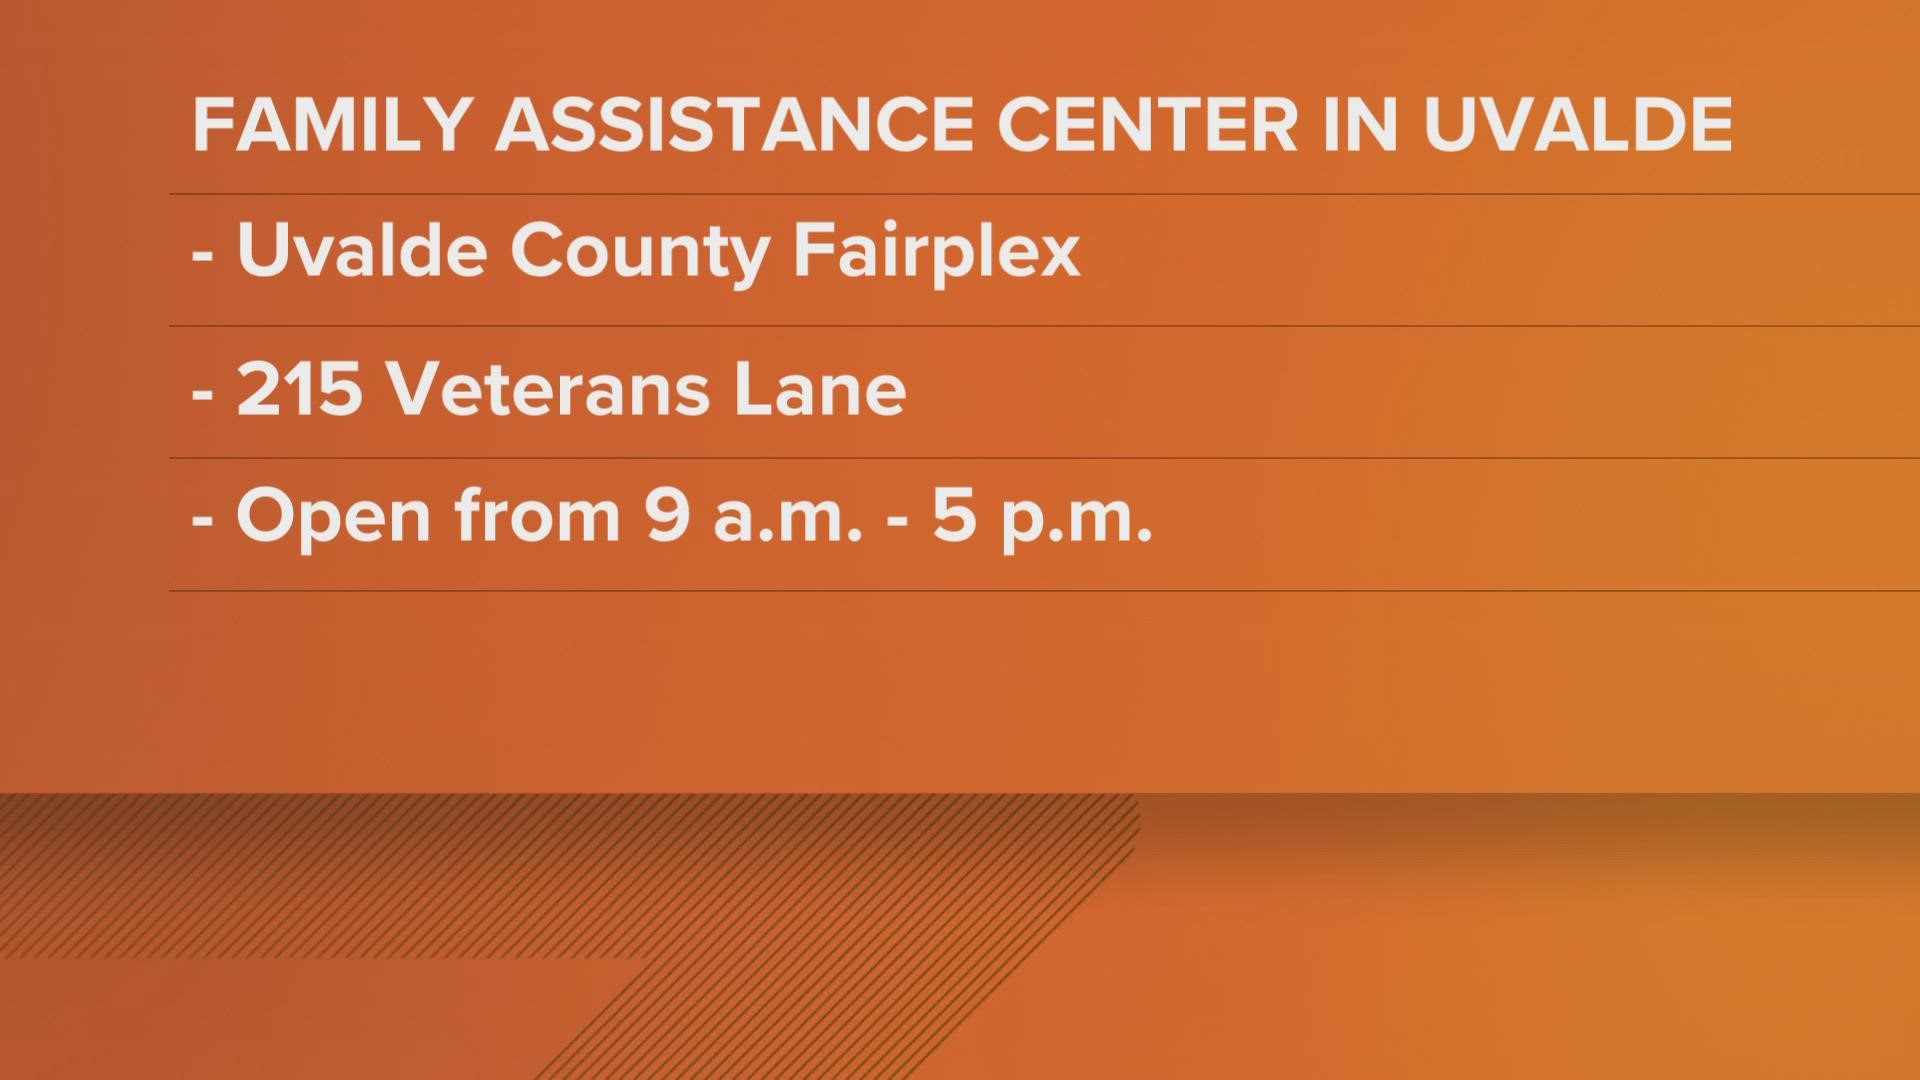 For those who have been directly affected by the shooting, resources are available everyday in Uvalde.